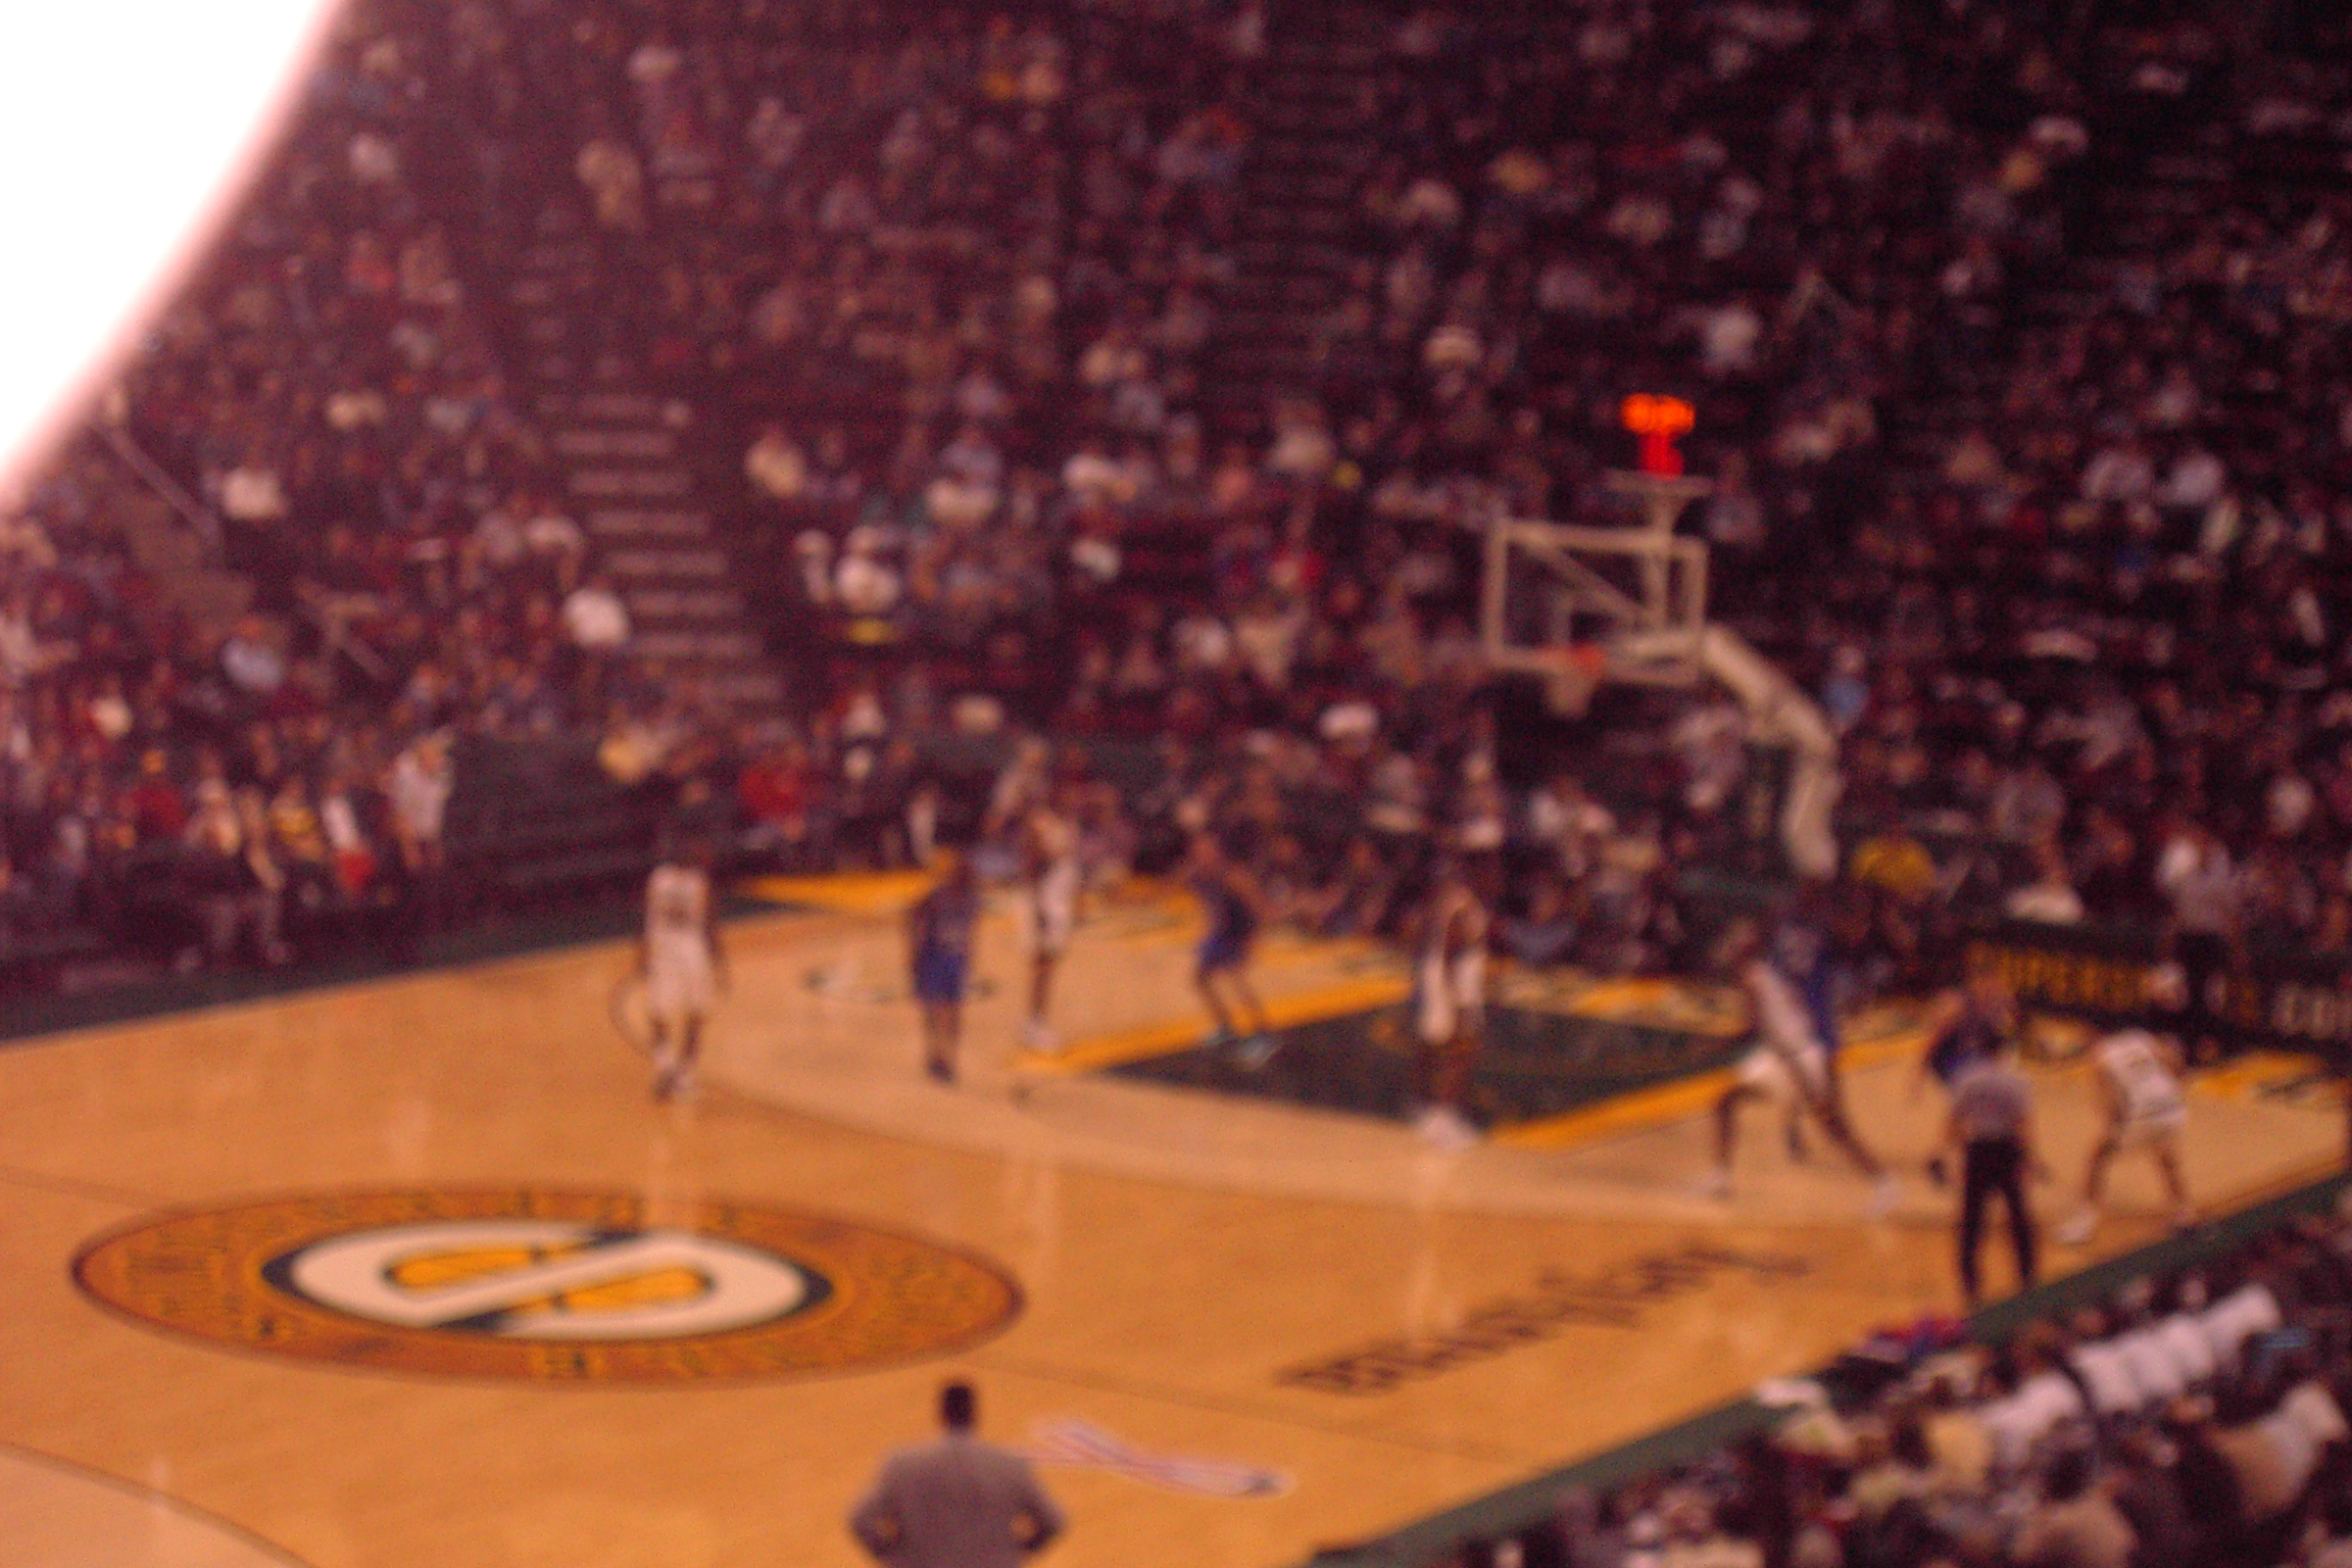 Seattle, Washington - Interview with MTG Management Consultants, SuperSonics Game, and Microsoft Campus